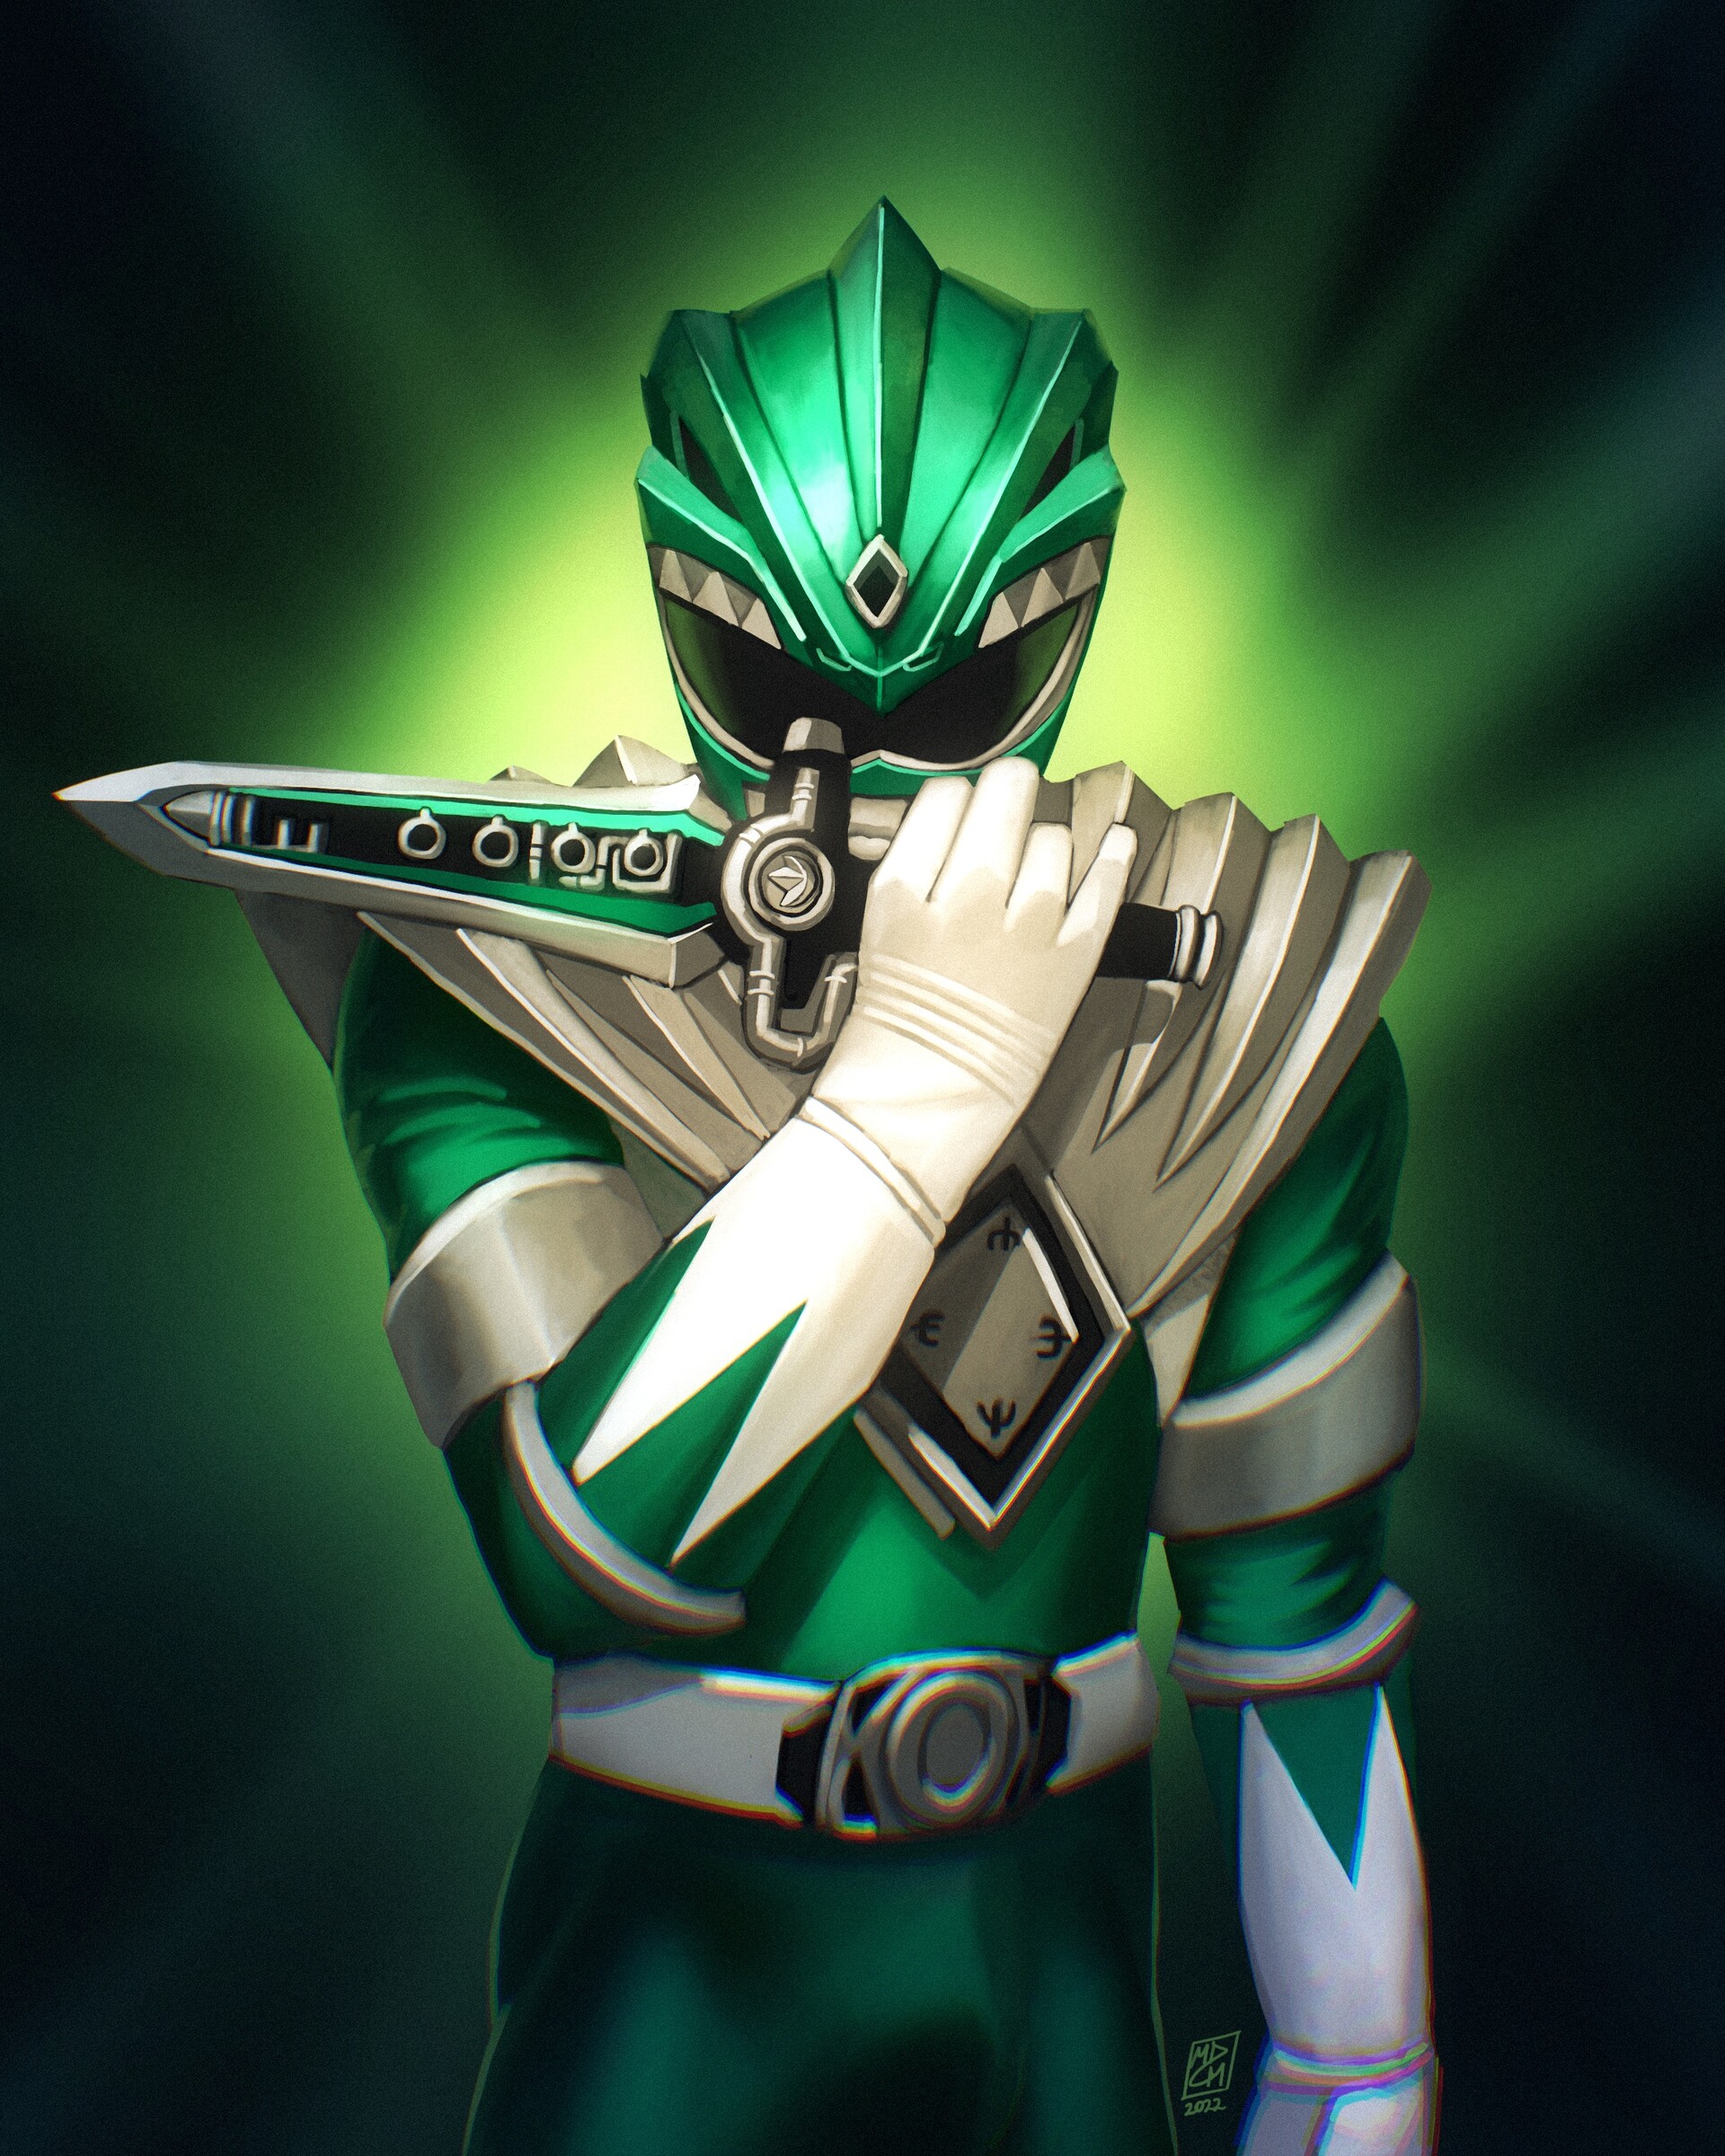 Wallpaper ID 692331  evil PR white game nWay dagger Lord Drakkon  red weapon Power Rangers Legacy Wars Tommy Oliver armor Power Rangers  1080P free download